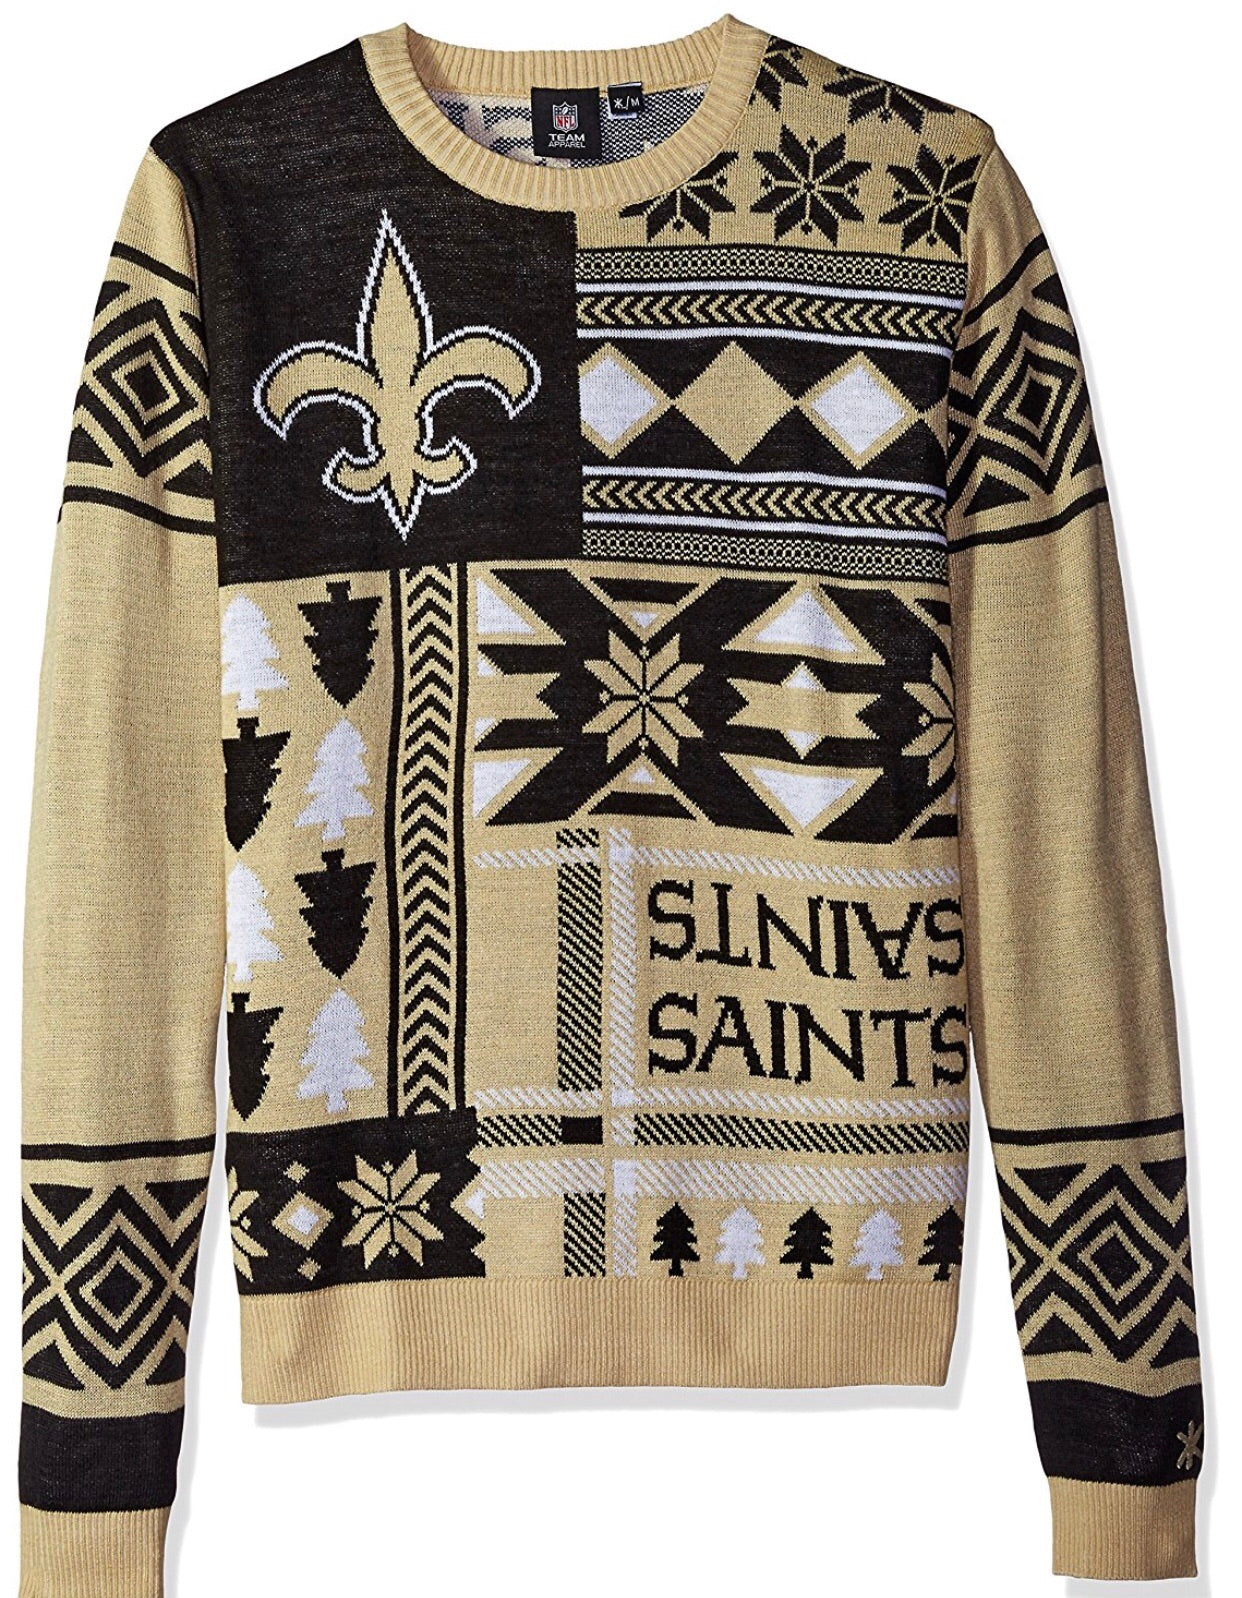 New Orleans Saints Ugly Christmas Sweaters